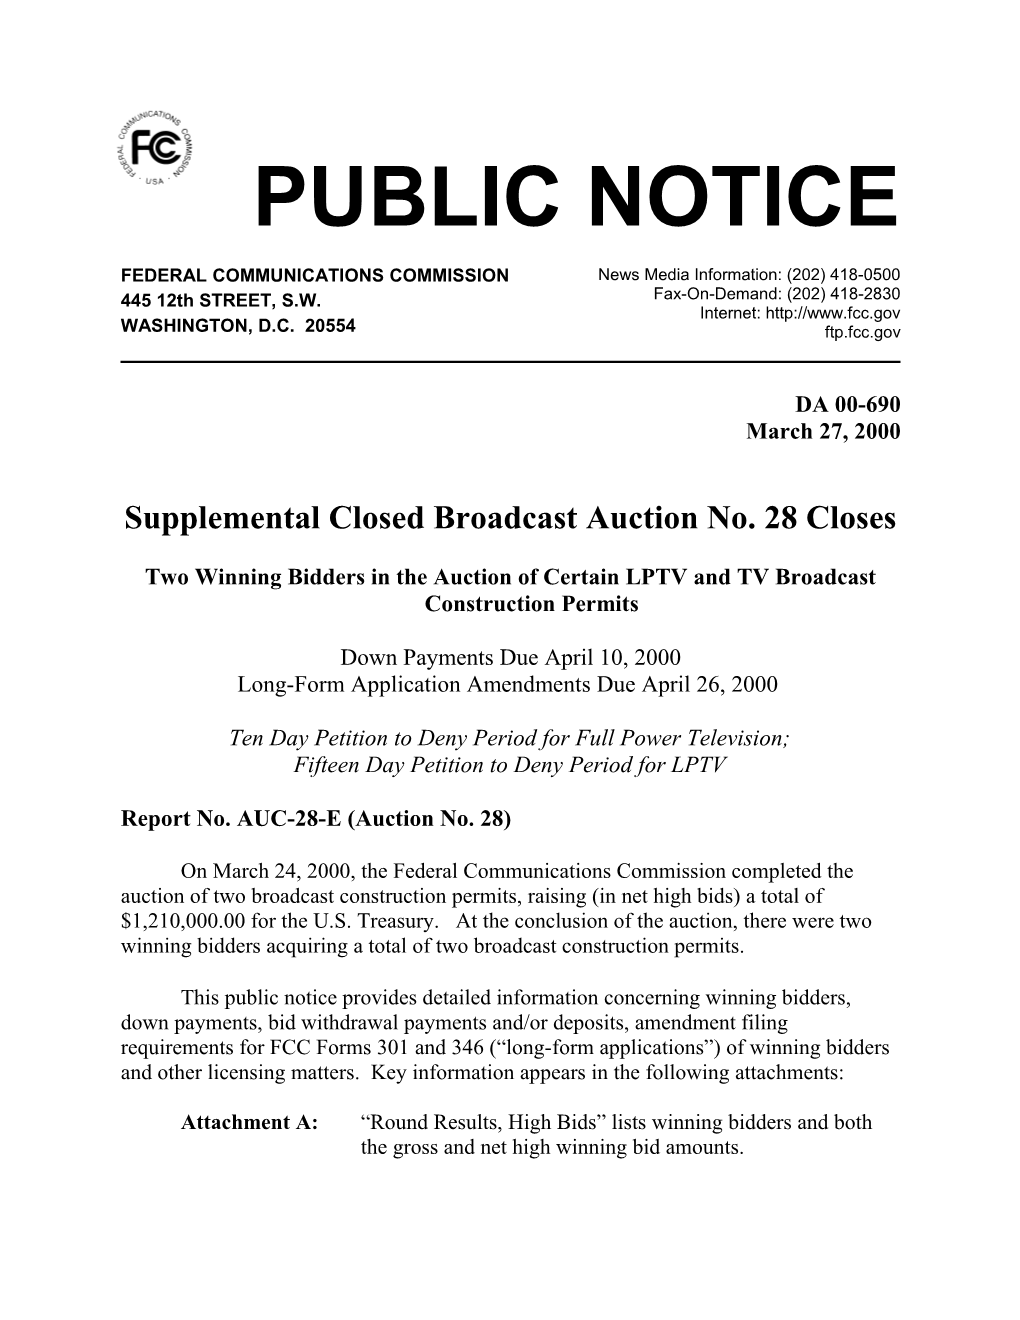 Supplemental Closed Broadcast Auction No. 28 Closes